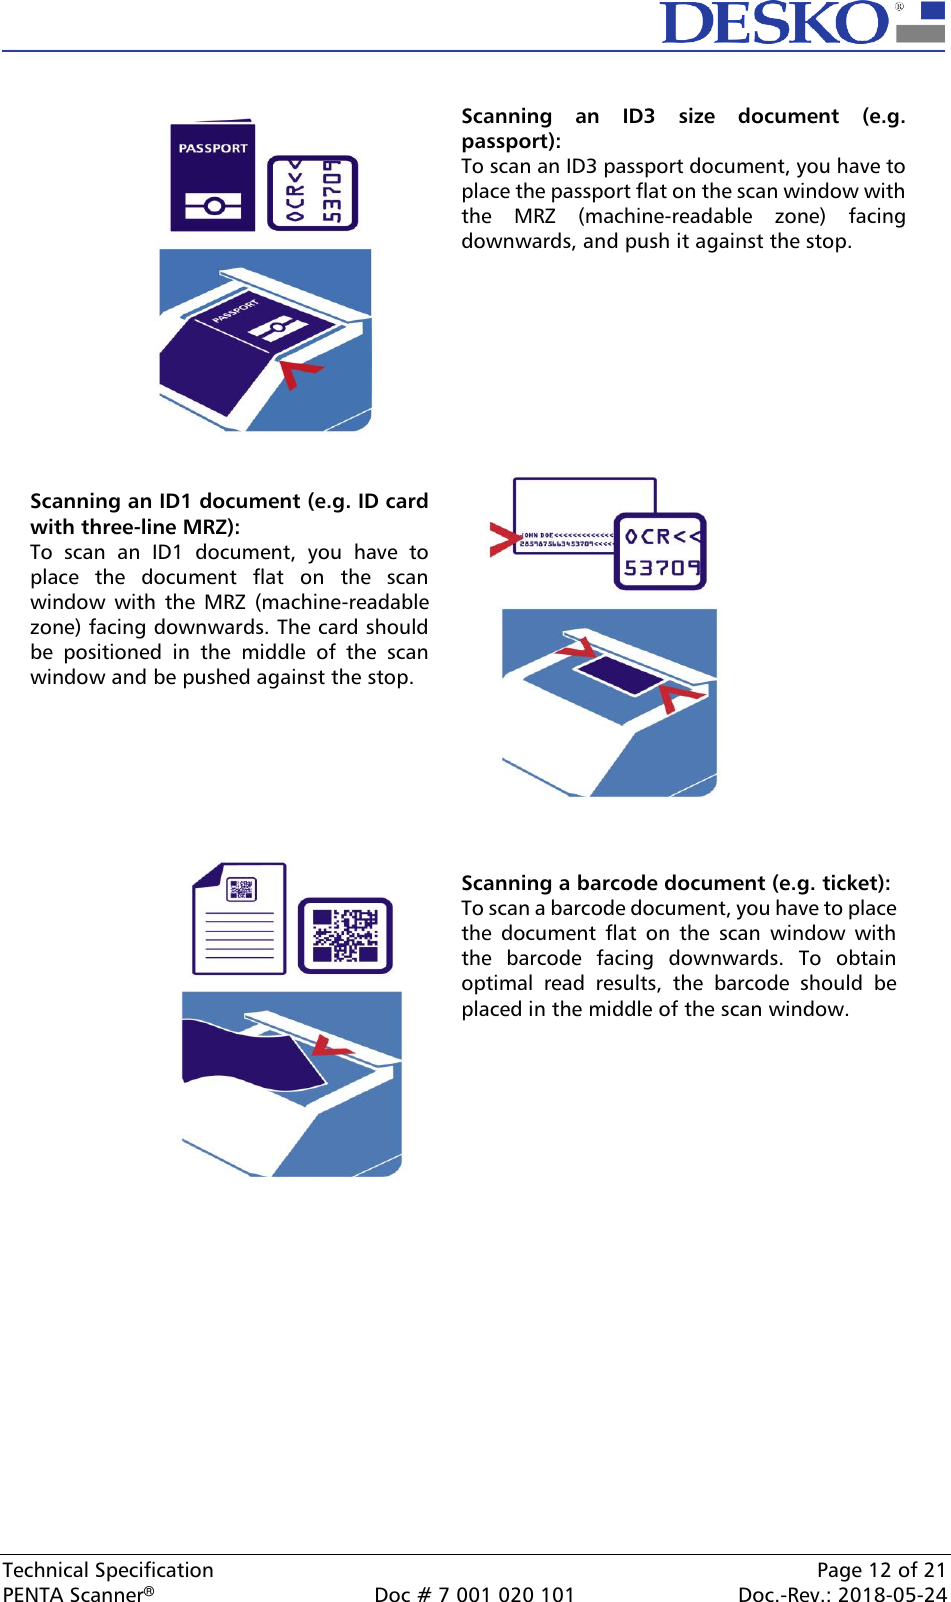  Technical Specification    Page 12 of 21 PENTA Scanner®  Doc # 7 001 020 101  Doc.-Rev.: 2018-05-24               Scanning an ID1 document (e.g. ID card with three-line MRZ): To  scan  an  ID1  document,  you  have  to place  the  document  flat  on  the  scan window  with  the  MRZ  (machine-readable zone) facing downwards. The card should be  positioned  in  the  middle  of  the  scan window and be pushed against the stop. Scanning a barcode document (e.g. ticket): To scan a barcode document, you have to place the  document  flat  on  the  scan  window  with the  barcode  facing  downwards.  To  obtain optimal  read  results,  the  barcode  should  be placed in the middle of the scan window.  Scanning  an  ID3  size  document  (e.g. passport): To scan an ID3 passport document, you have to place the passport flat on the scan window with the  MRZ  (machine-readable  zone)  facing downwards, and push it against the stop. 